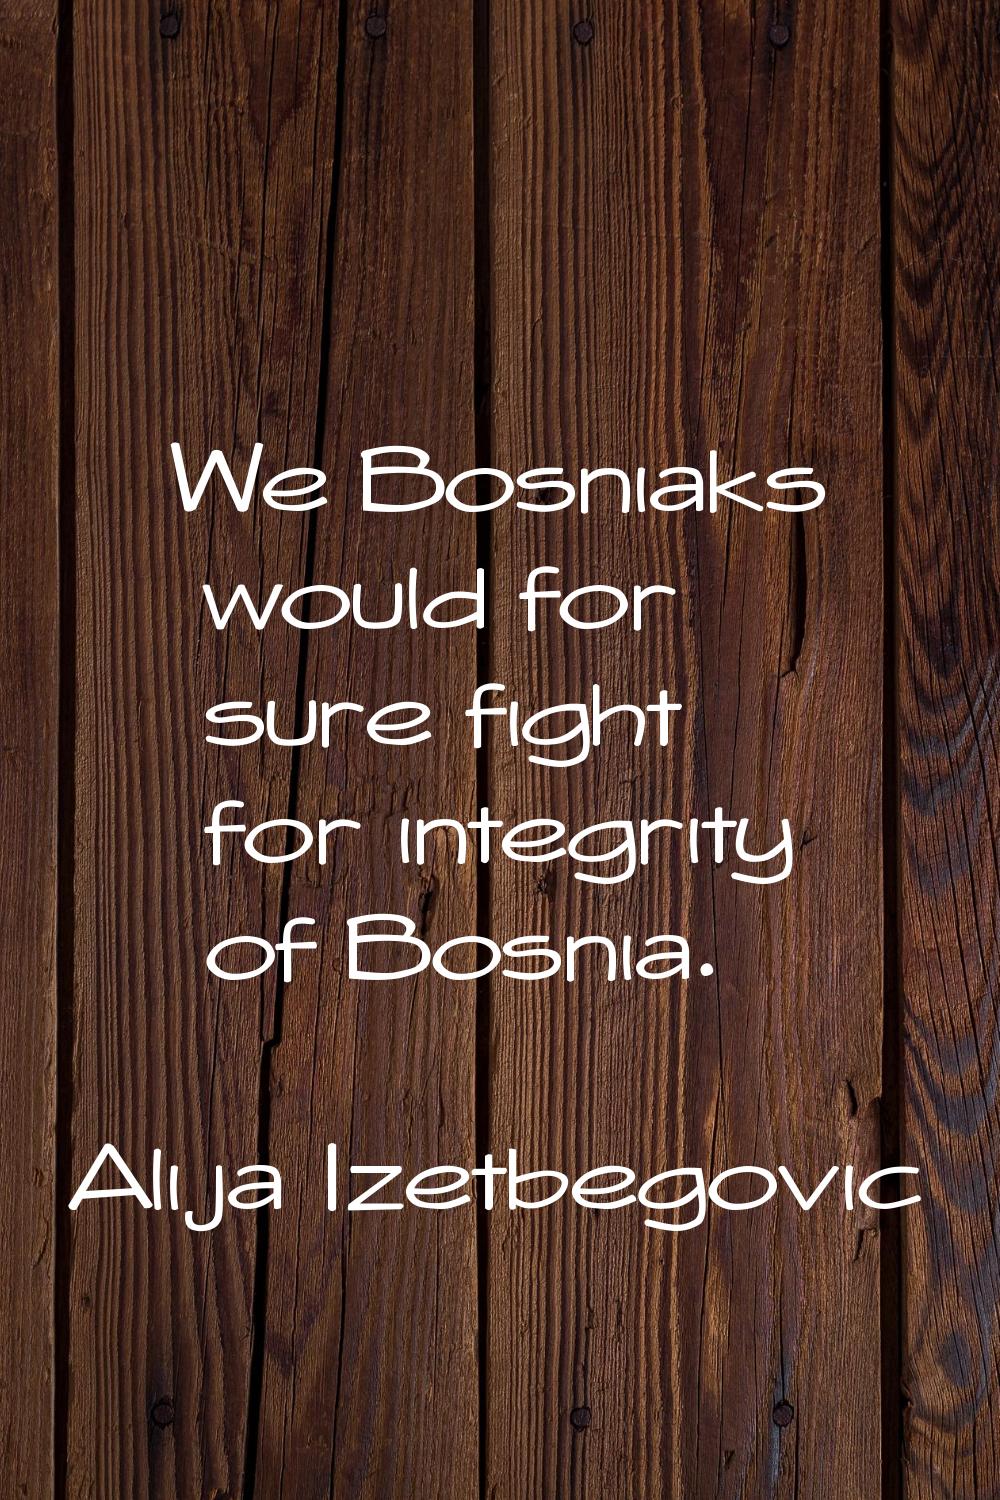 We Bosniaks would for sure fight for integrity of Bosnia.